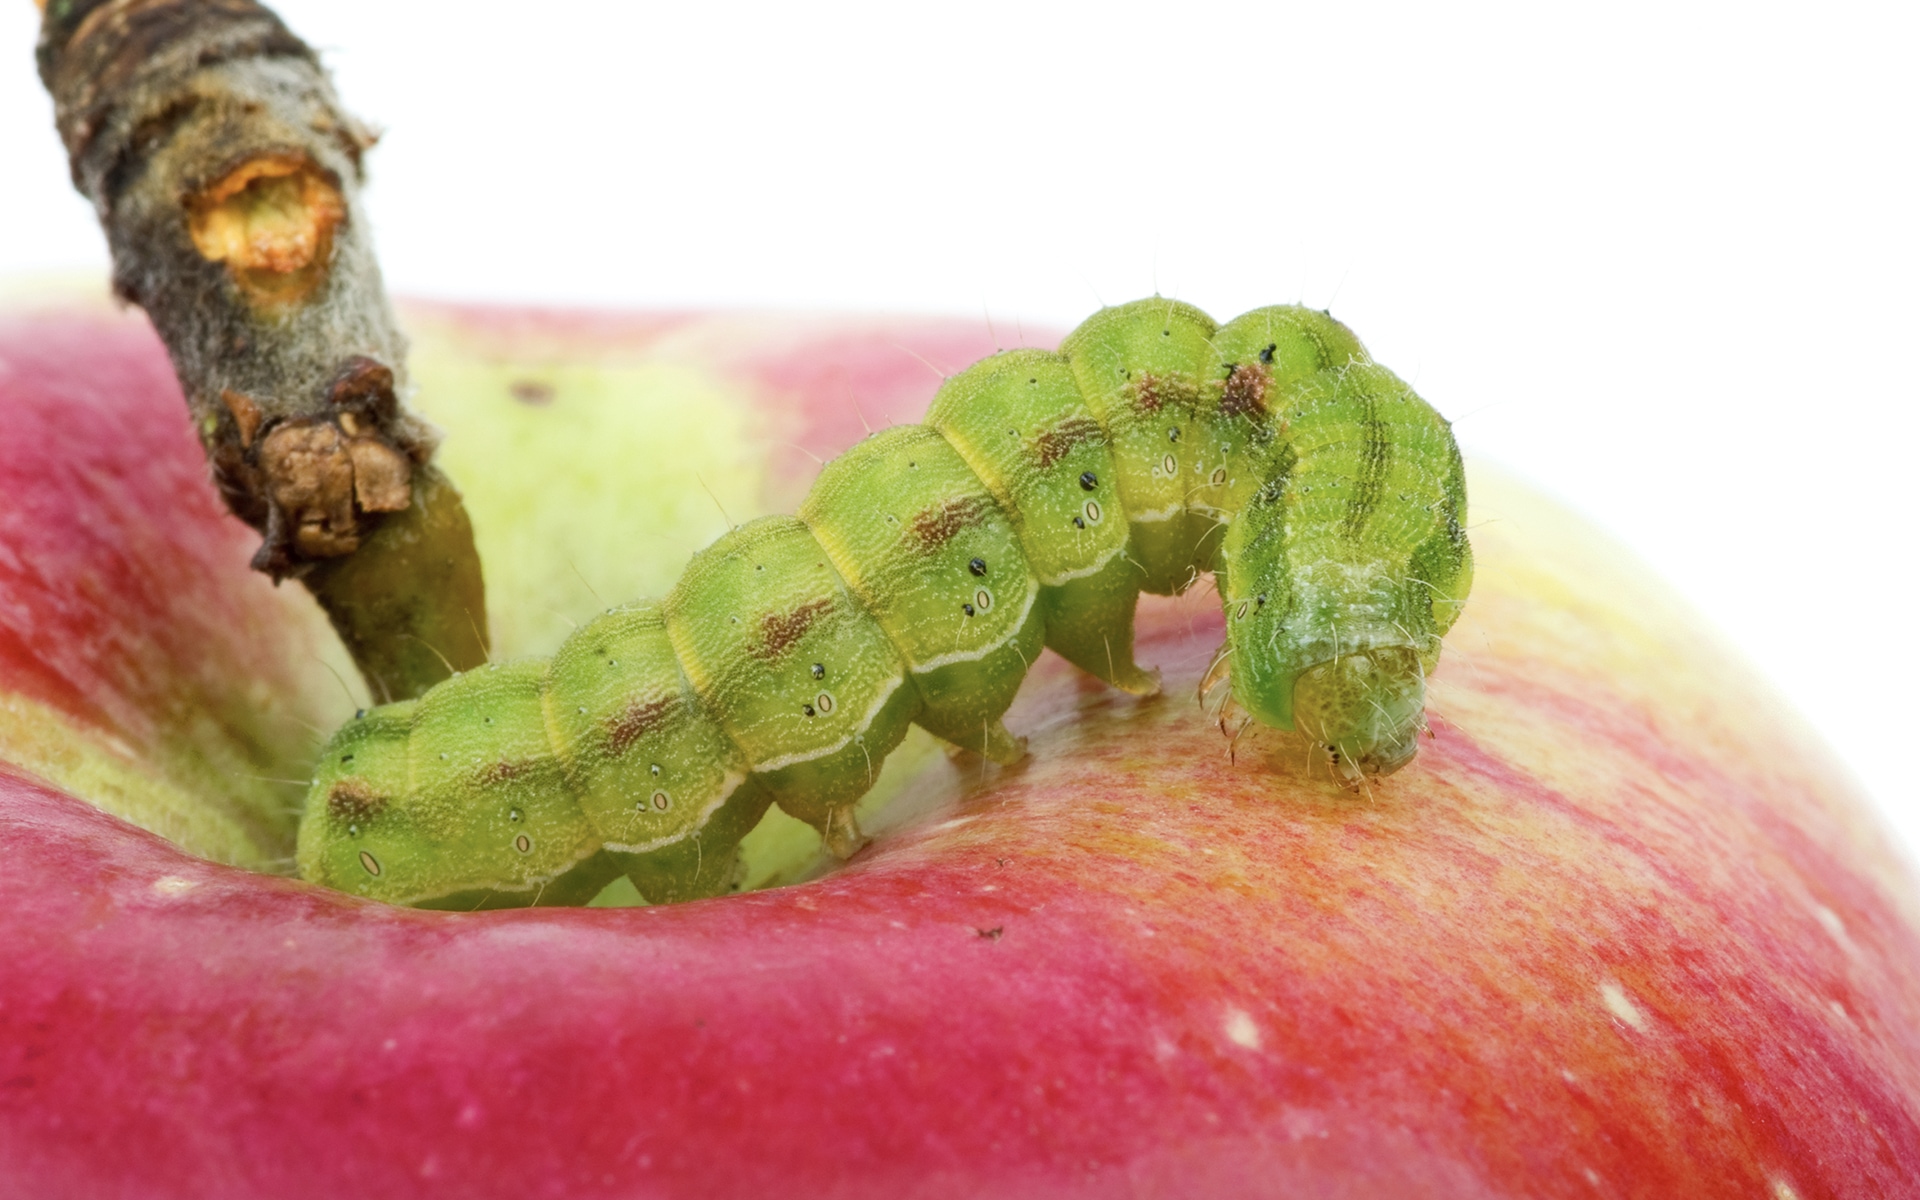 Caterpillar eating a red apple